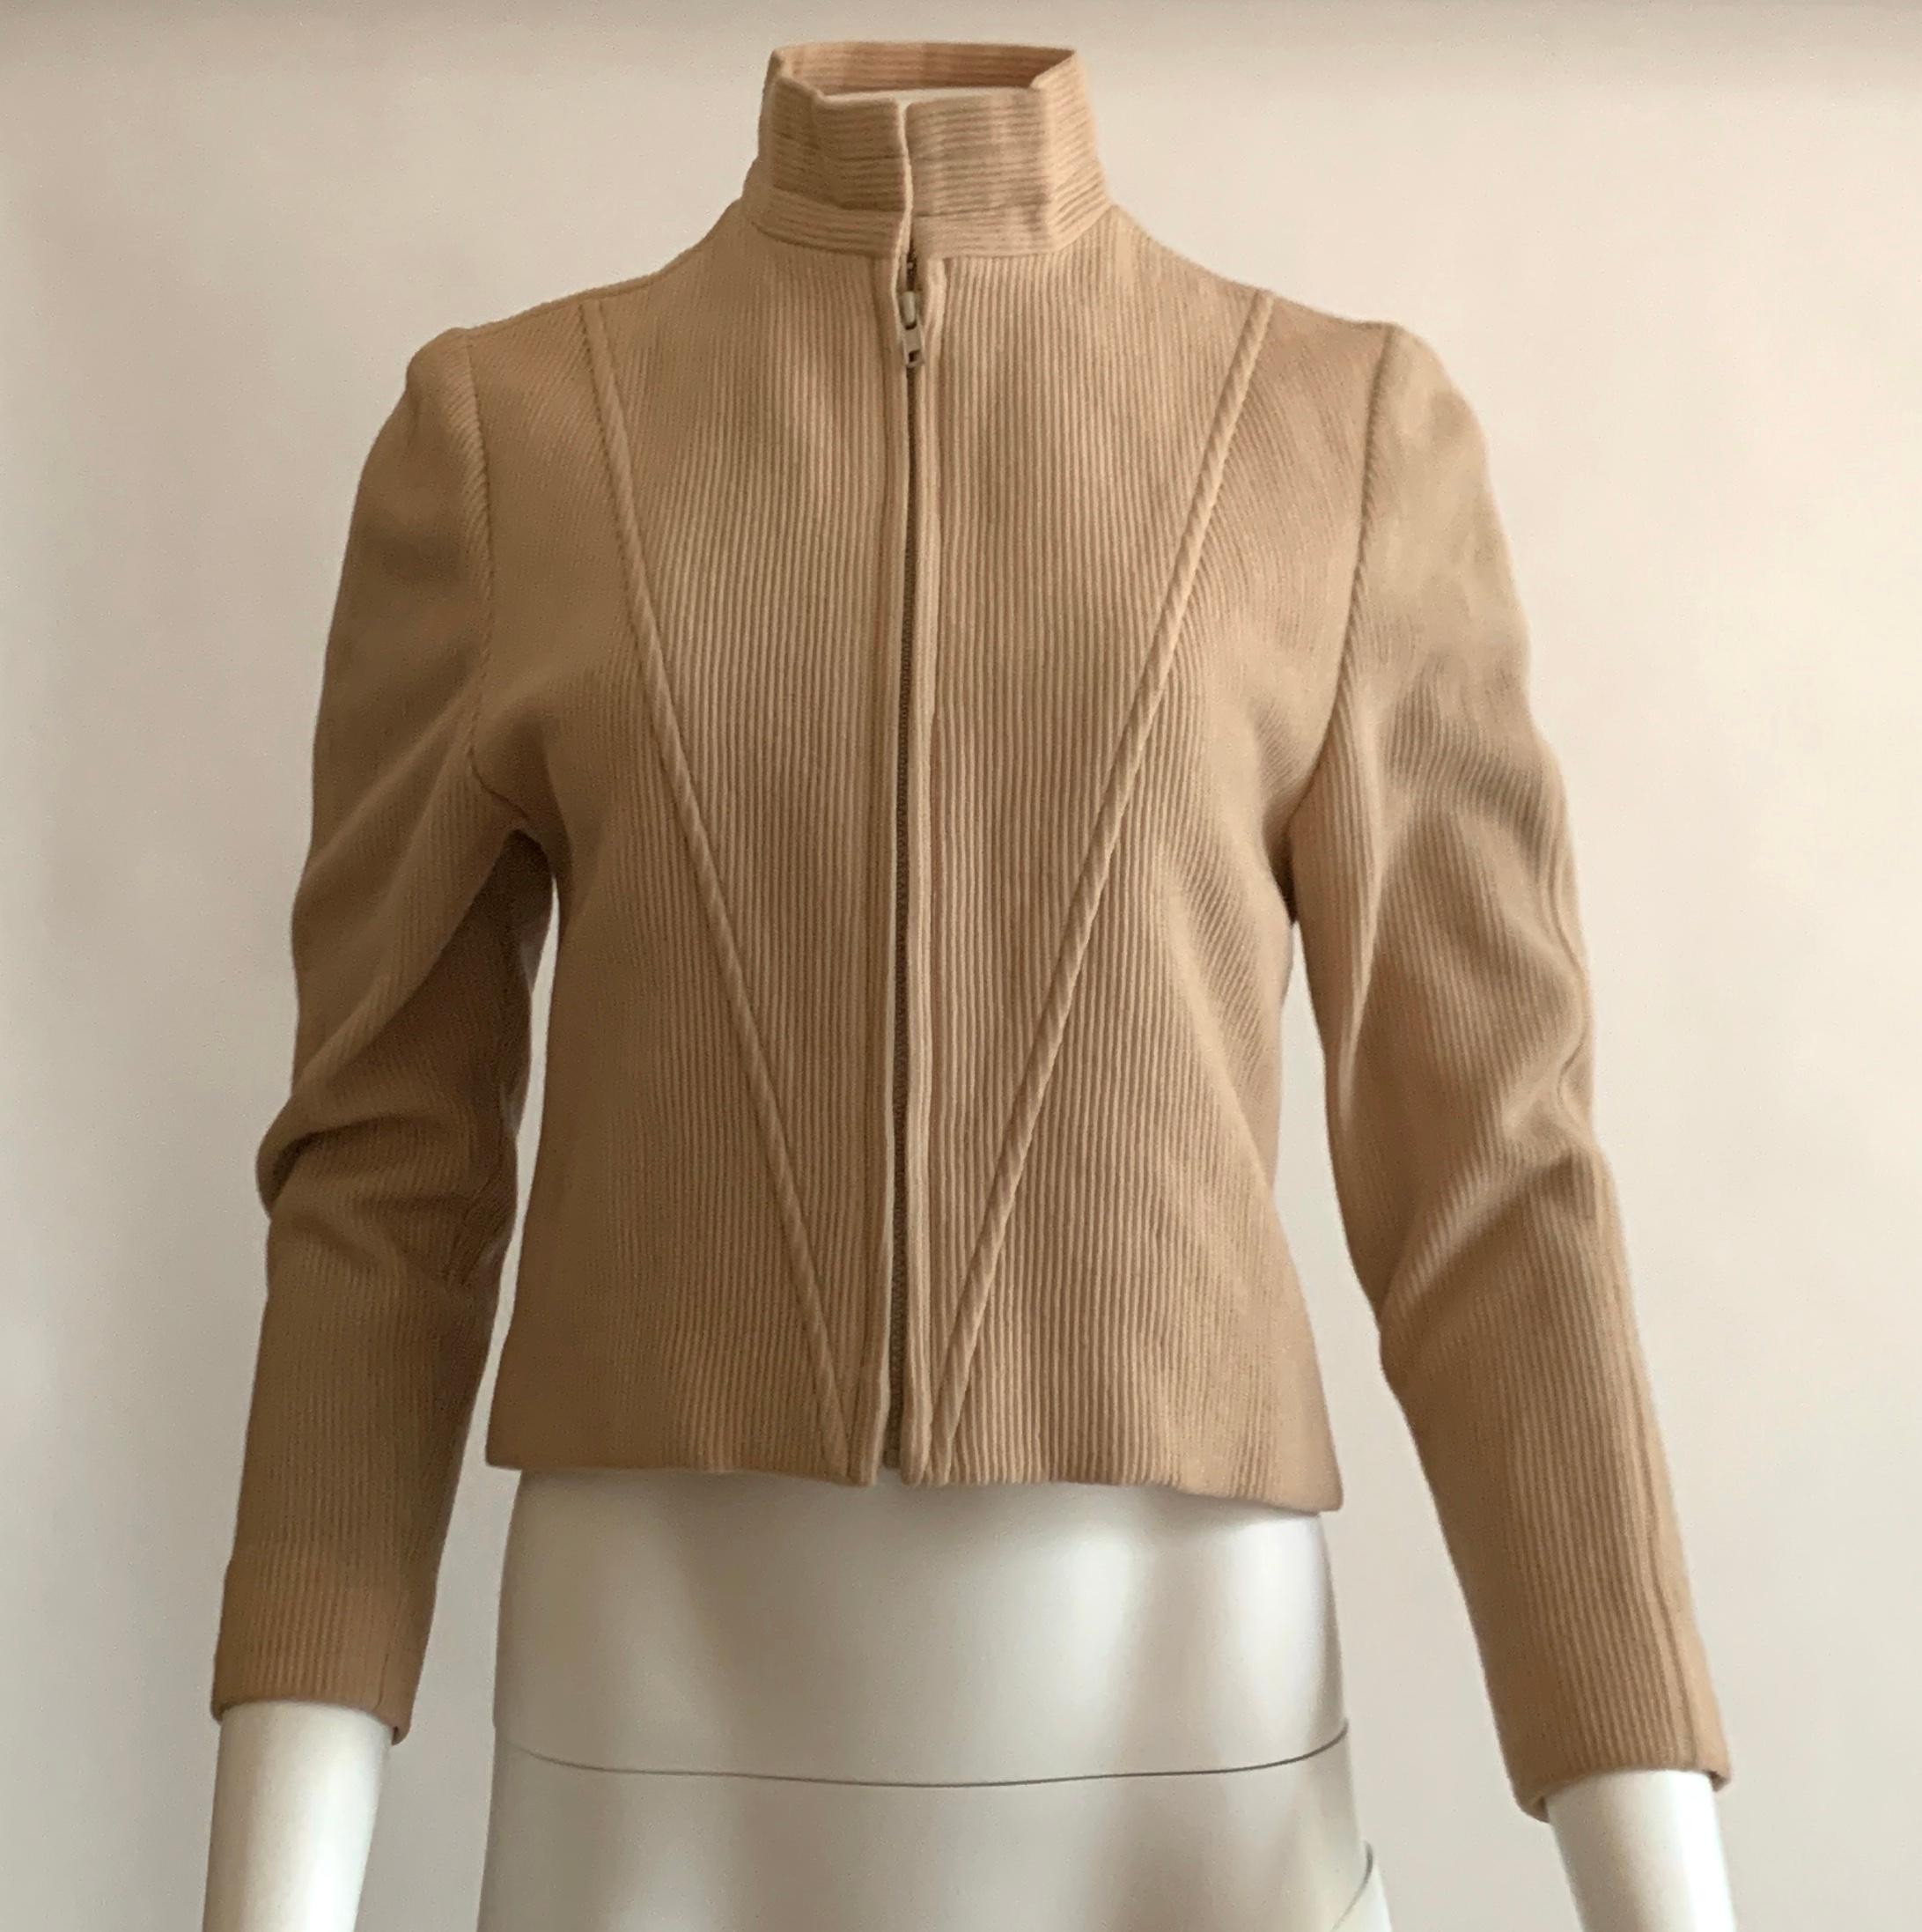 Vintage Geoffrey Been light tan rib knit moto style jacket. Long sleeve, seam detailing at front. Zip front, two hook and eyes at neck. 

Content unknown, feels like wool blend. 
Fully lined.

No size label, best fits S. See measurements.
Bust